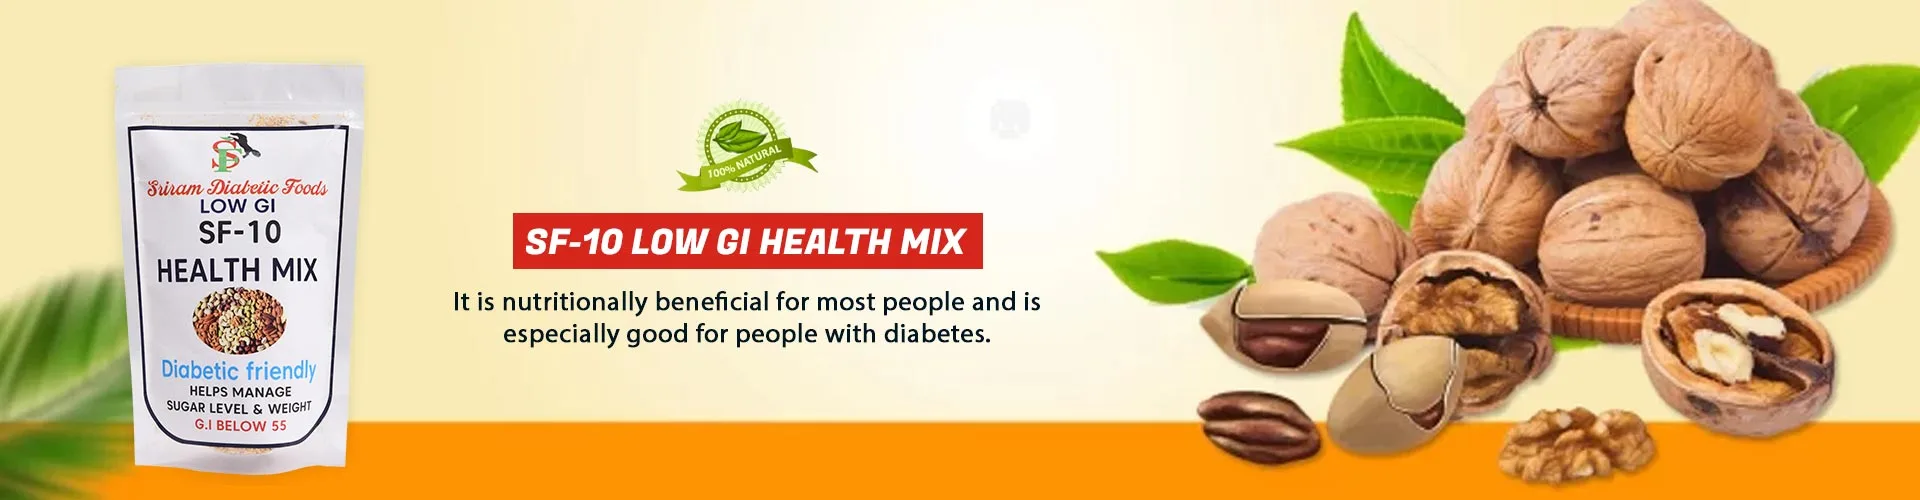 Health Mix Manufacturers in Wollongong